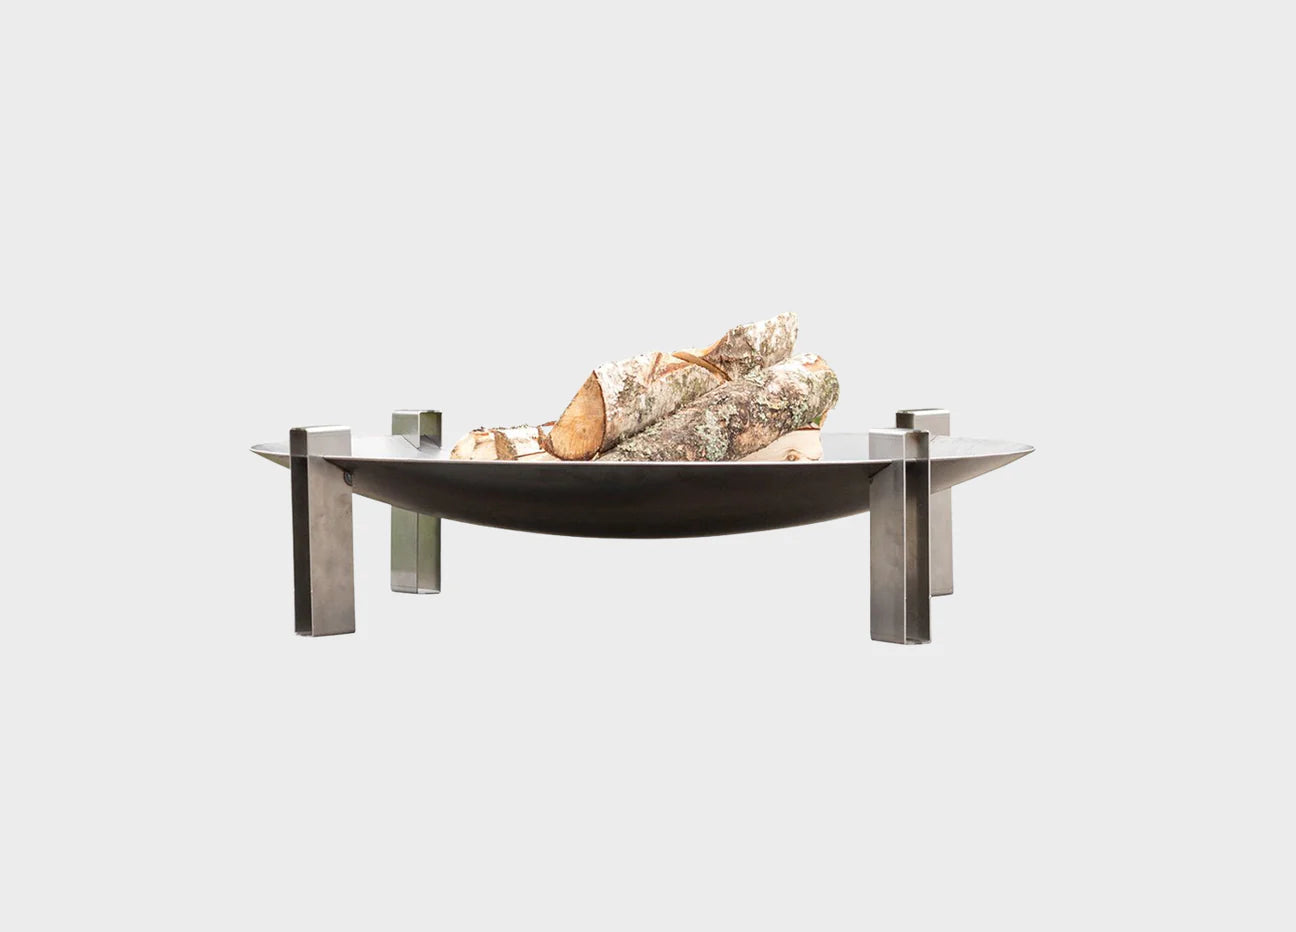 Alfred Riess Stromboli Steel Fire Pit - Large